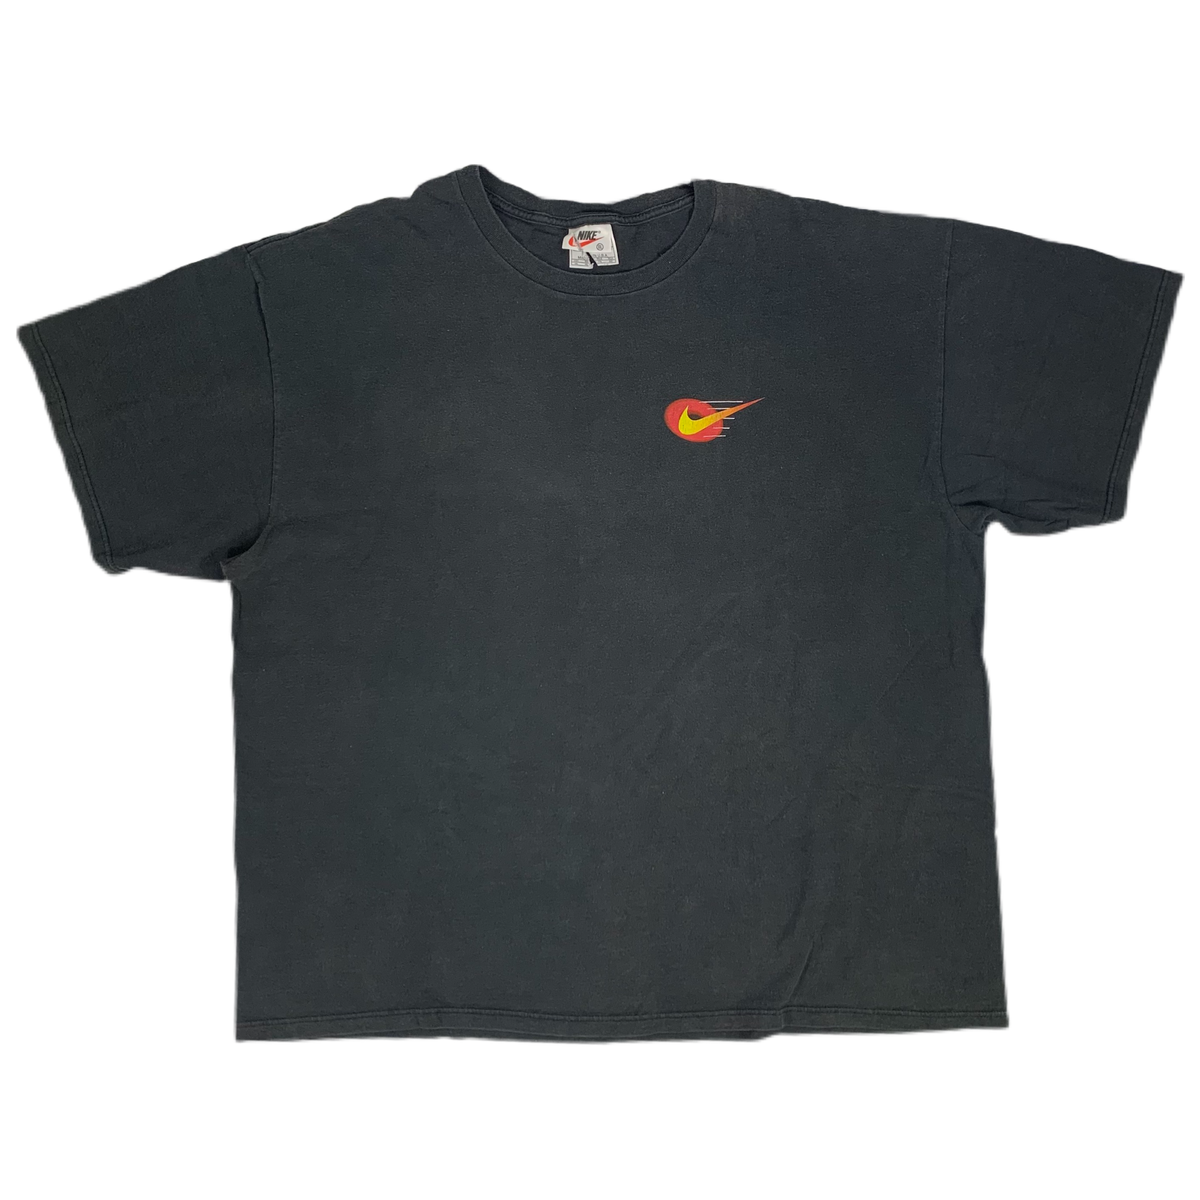 Vintage Nike &quot;Rollerblader&quot; T-Shirt